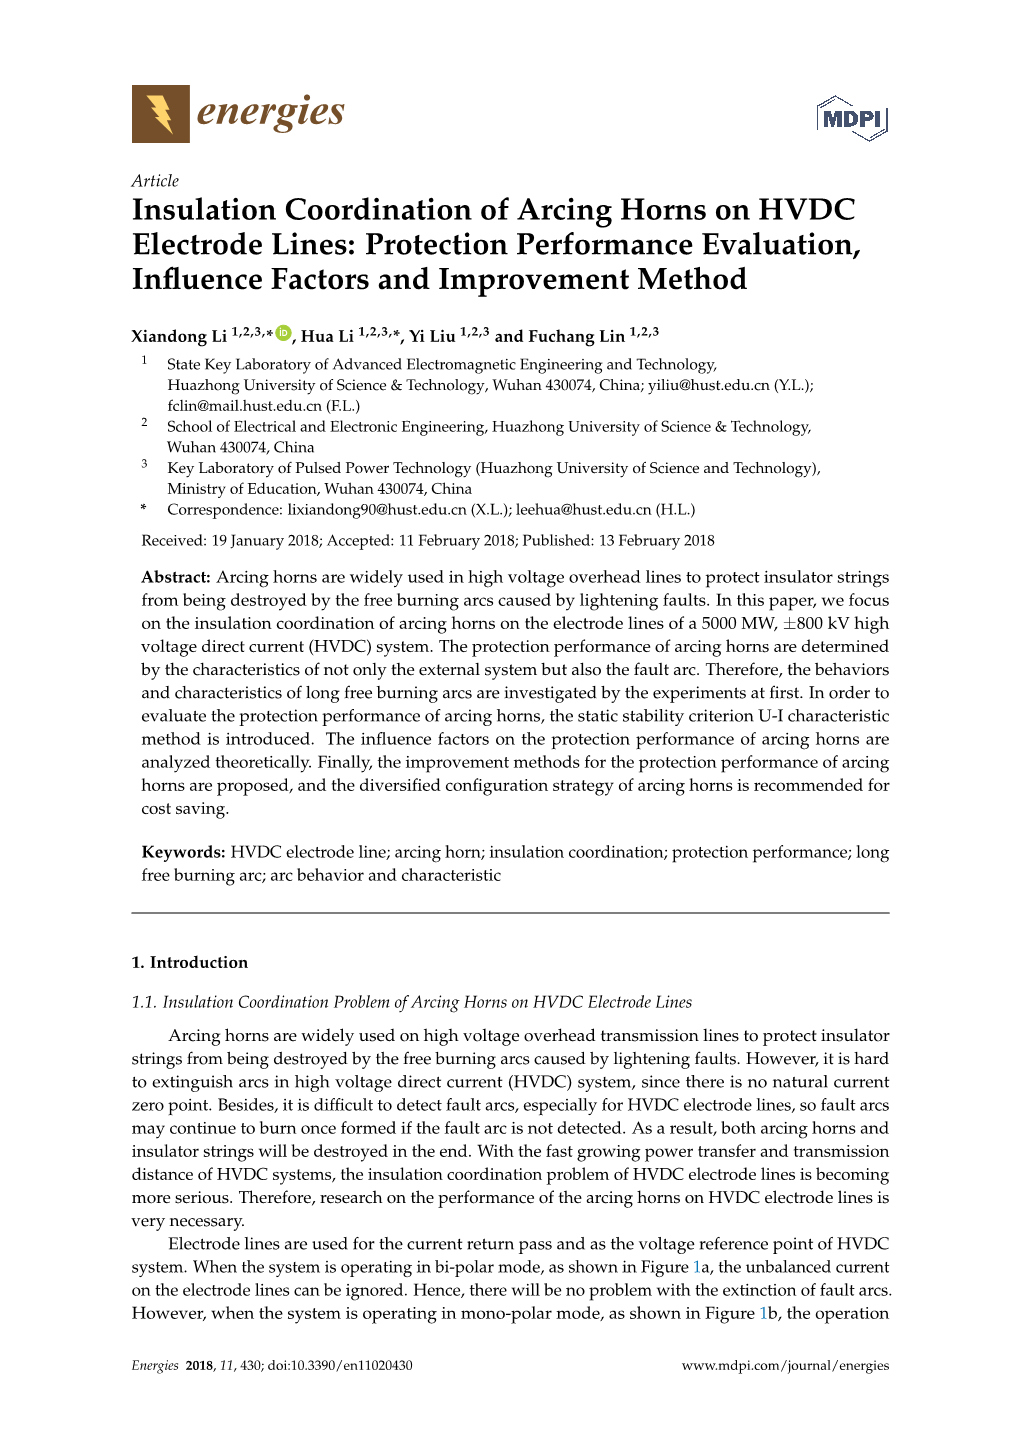 Insulation Coordination of Arcing Horns on HVDC Electrode Lines: Protection Performance Evaluation, Inﬂuence Factors and Improvement Method